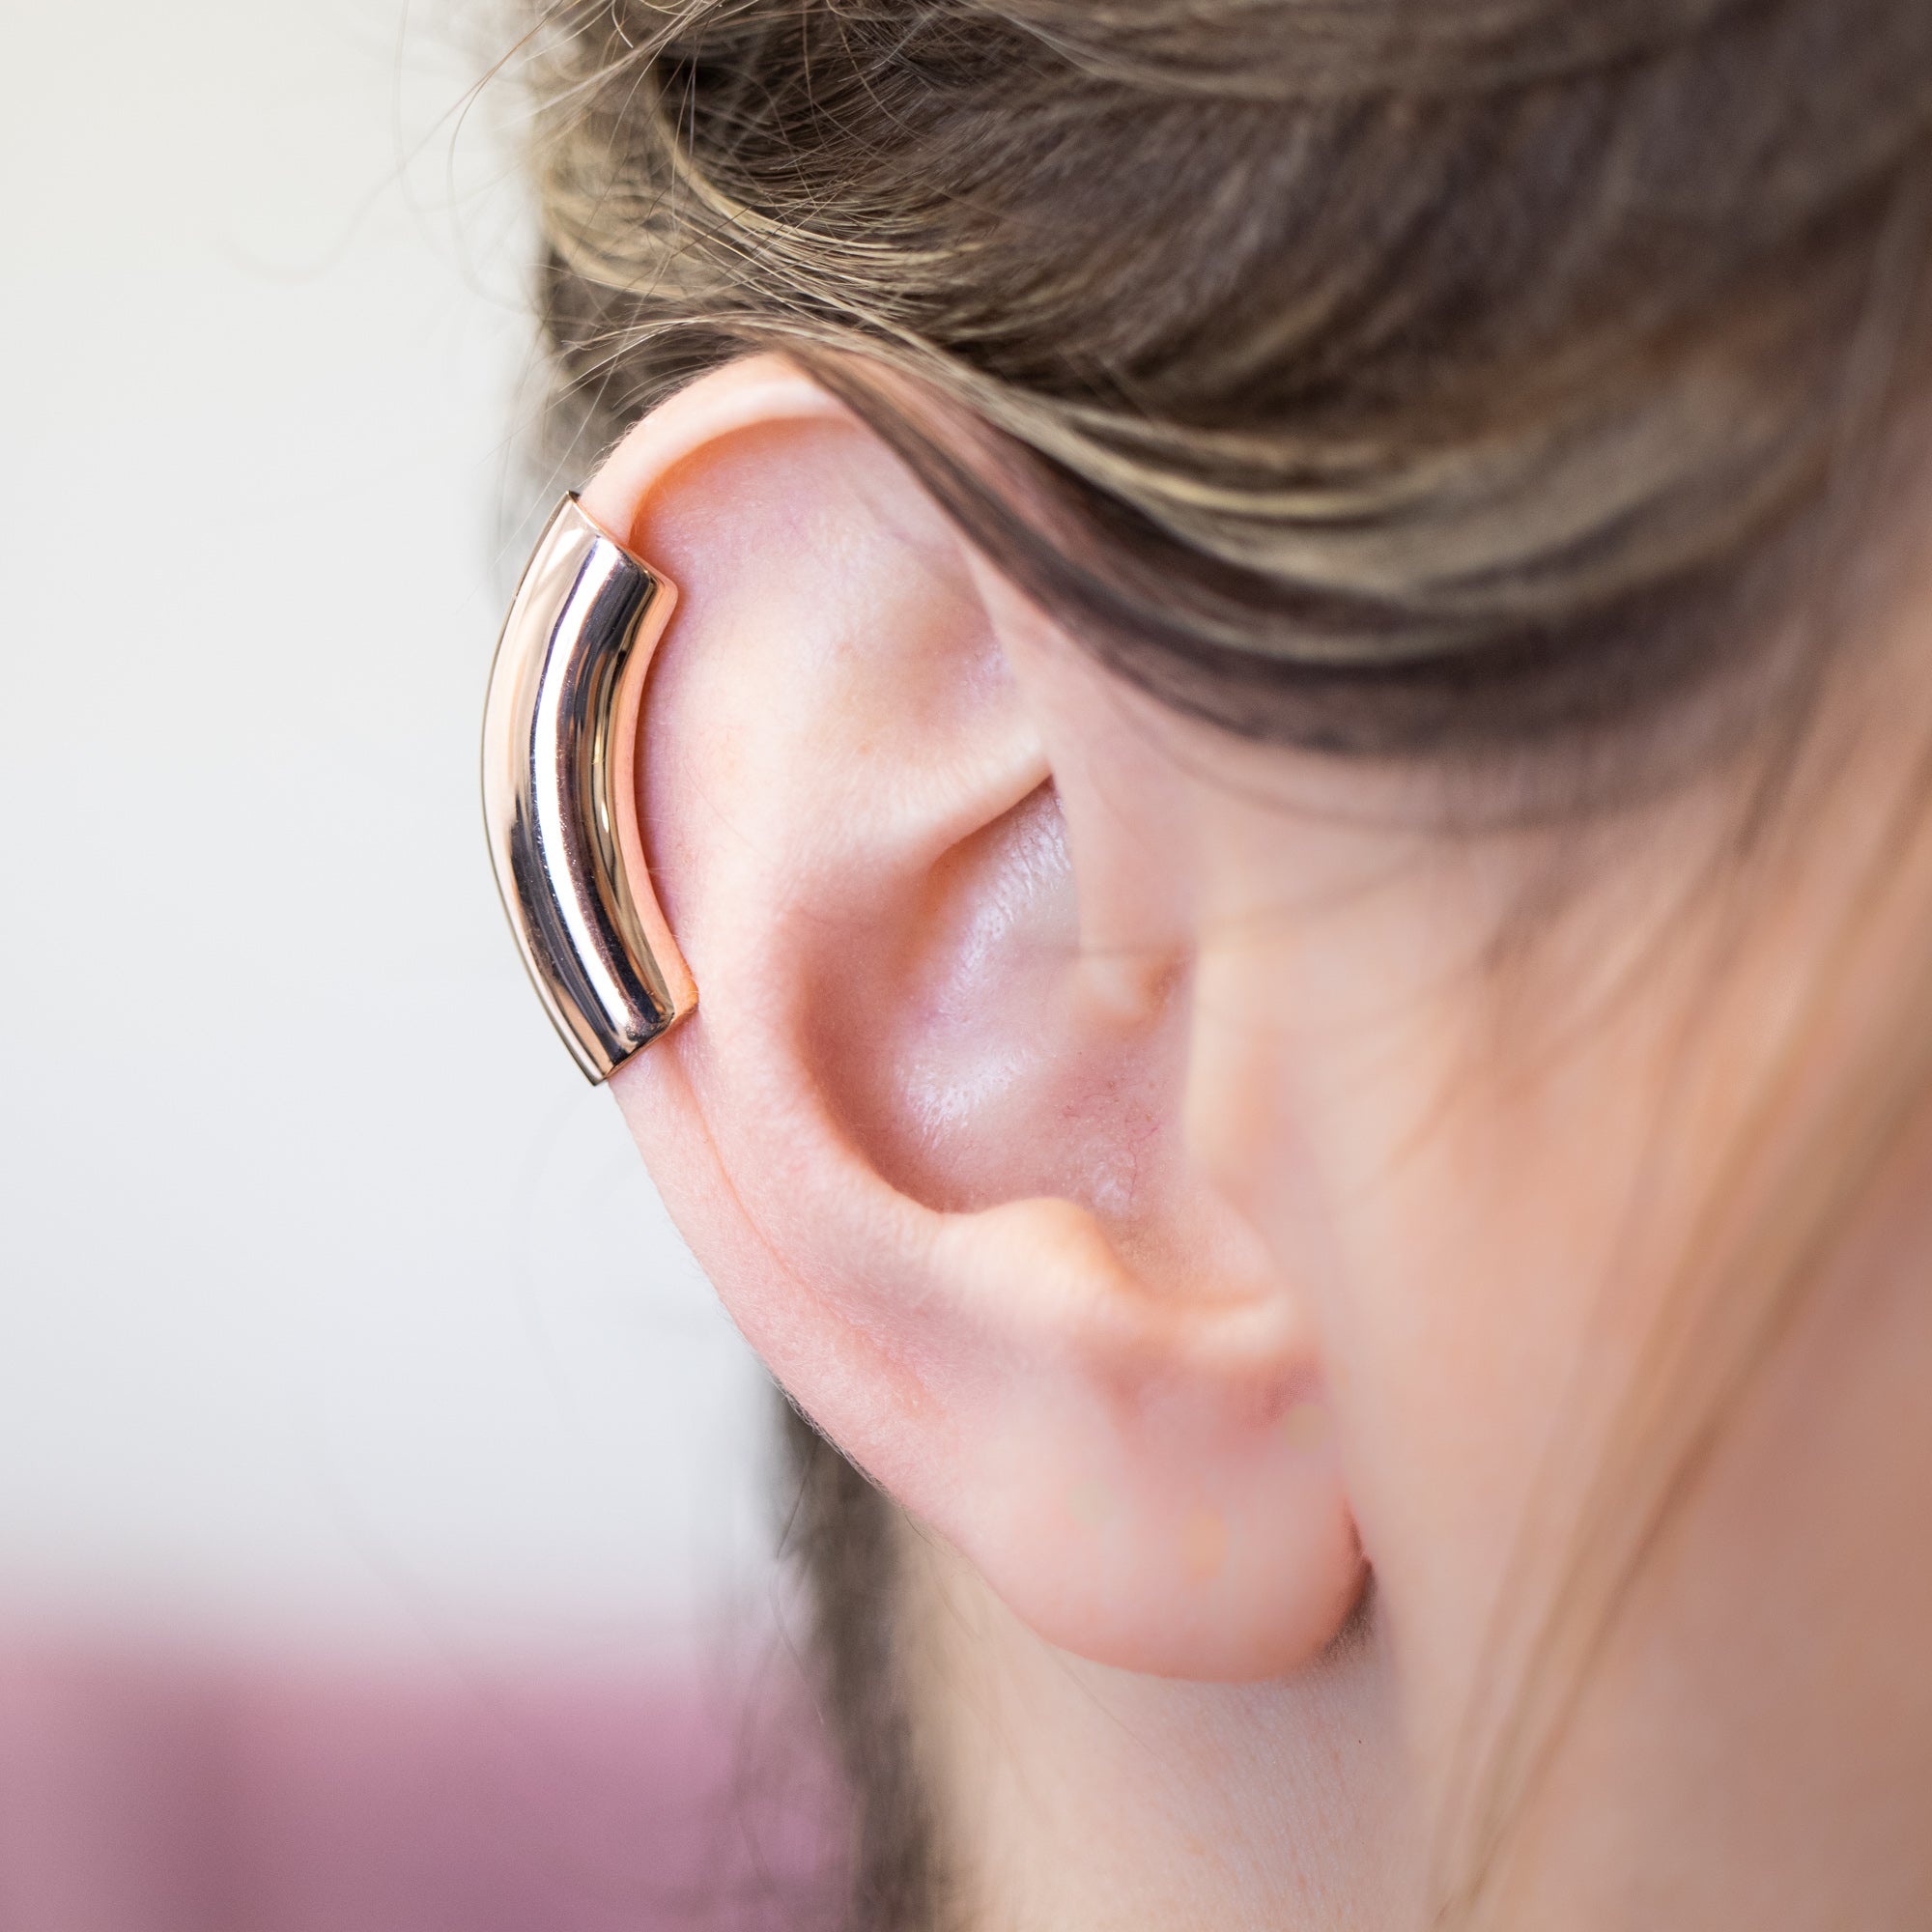 heres classic ear cuff | gualterhelicopteros.com.br